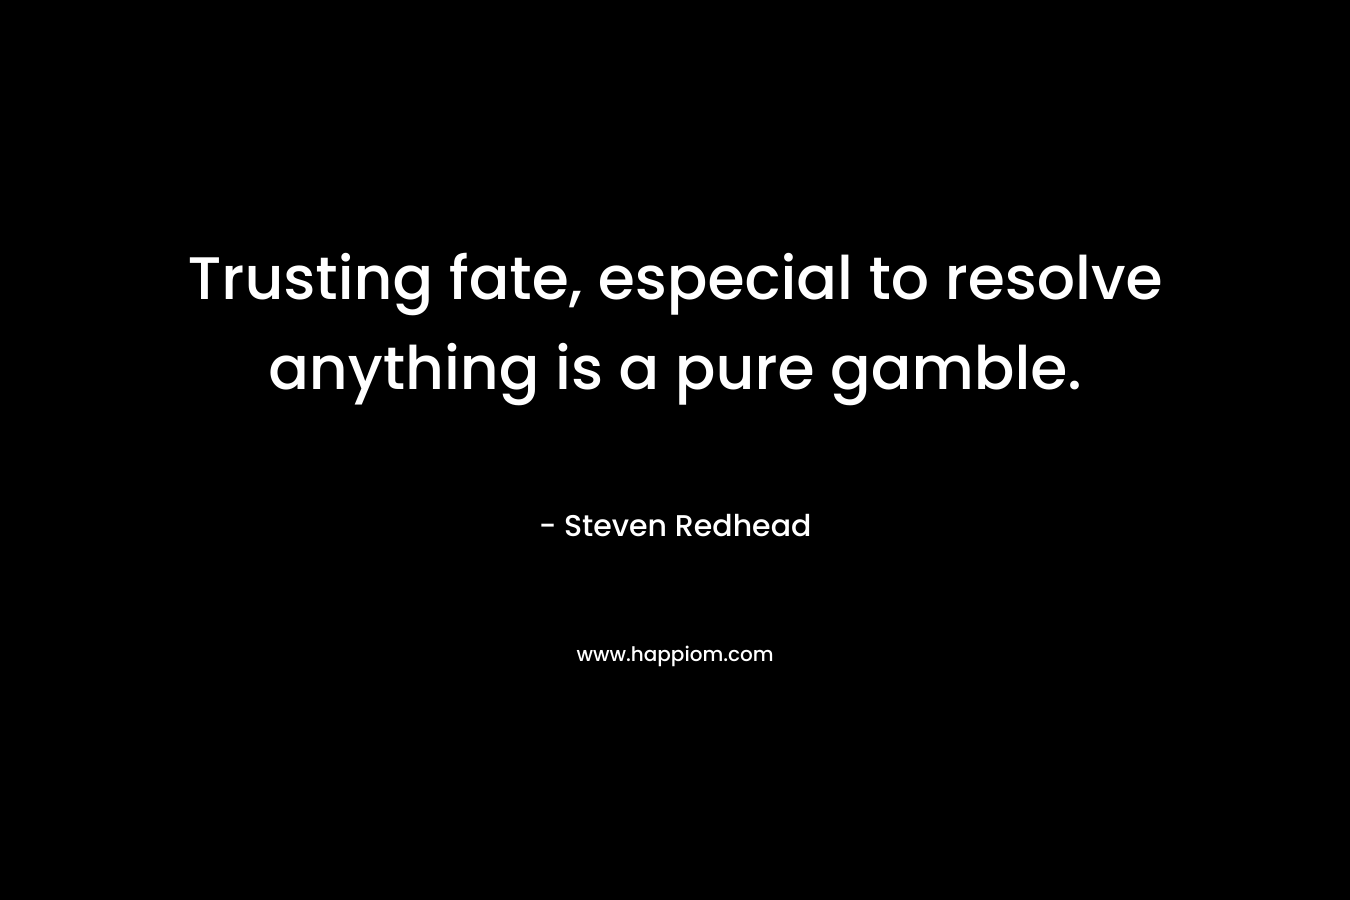 Trusting fate, especial to resolve anything is a pure gamble. – Steven Redhead